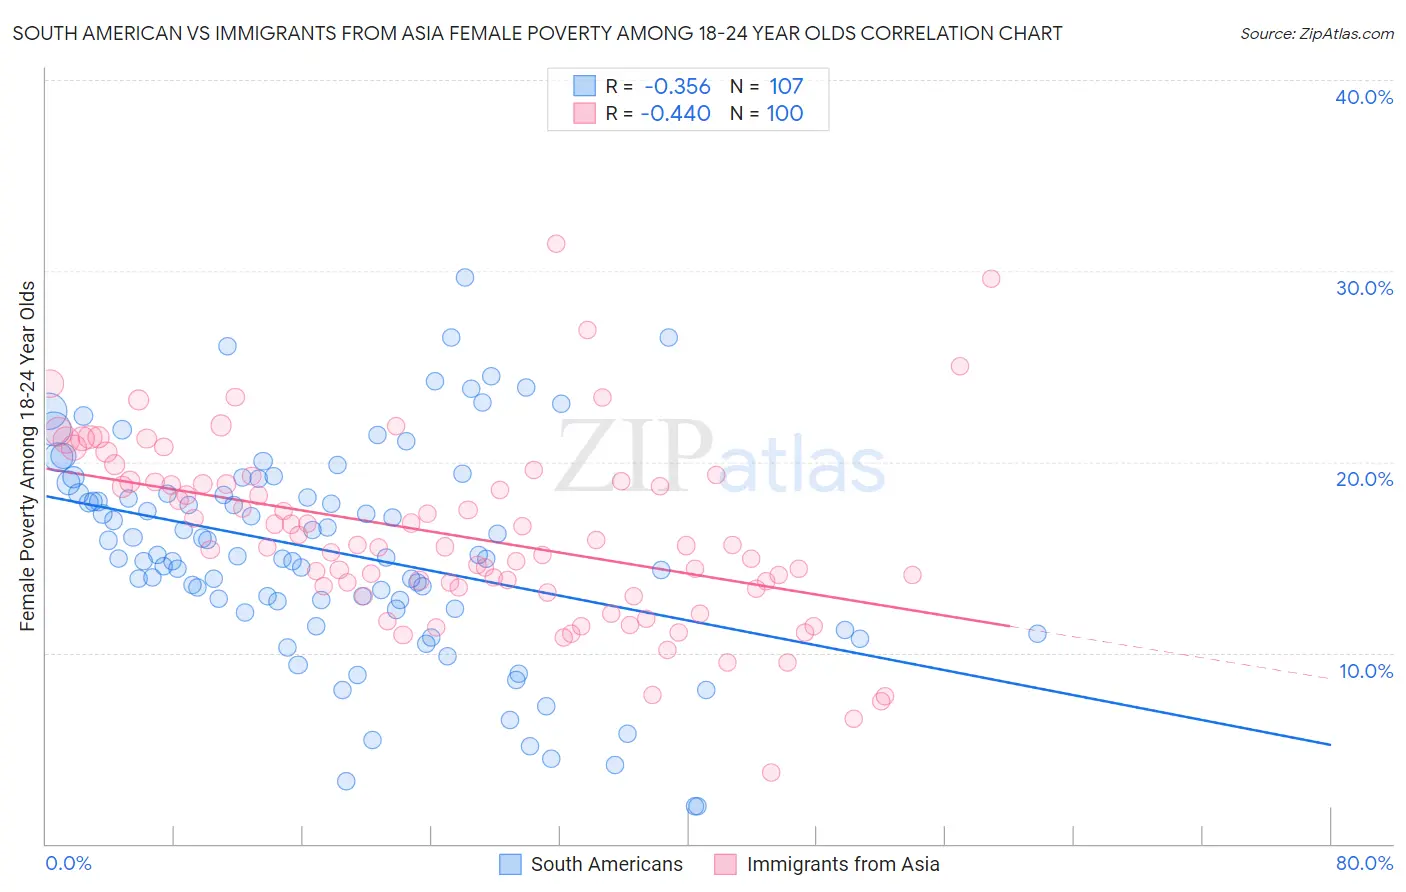 South American vs Immigrants from Asia Female Poverty Among 18-24 Year Olds